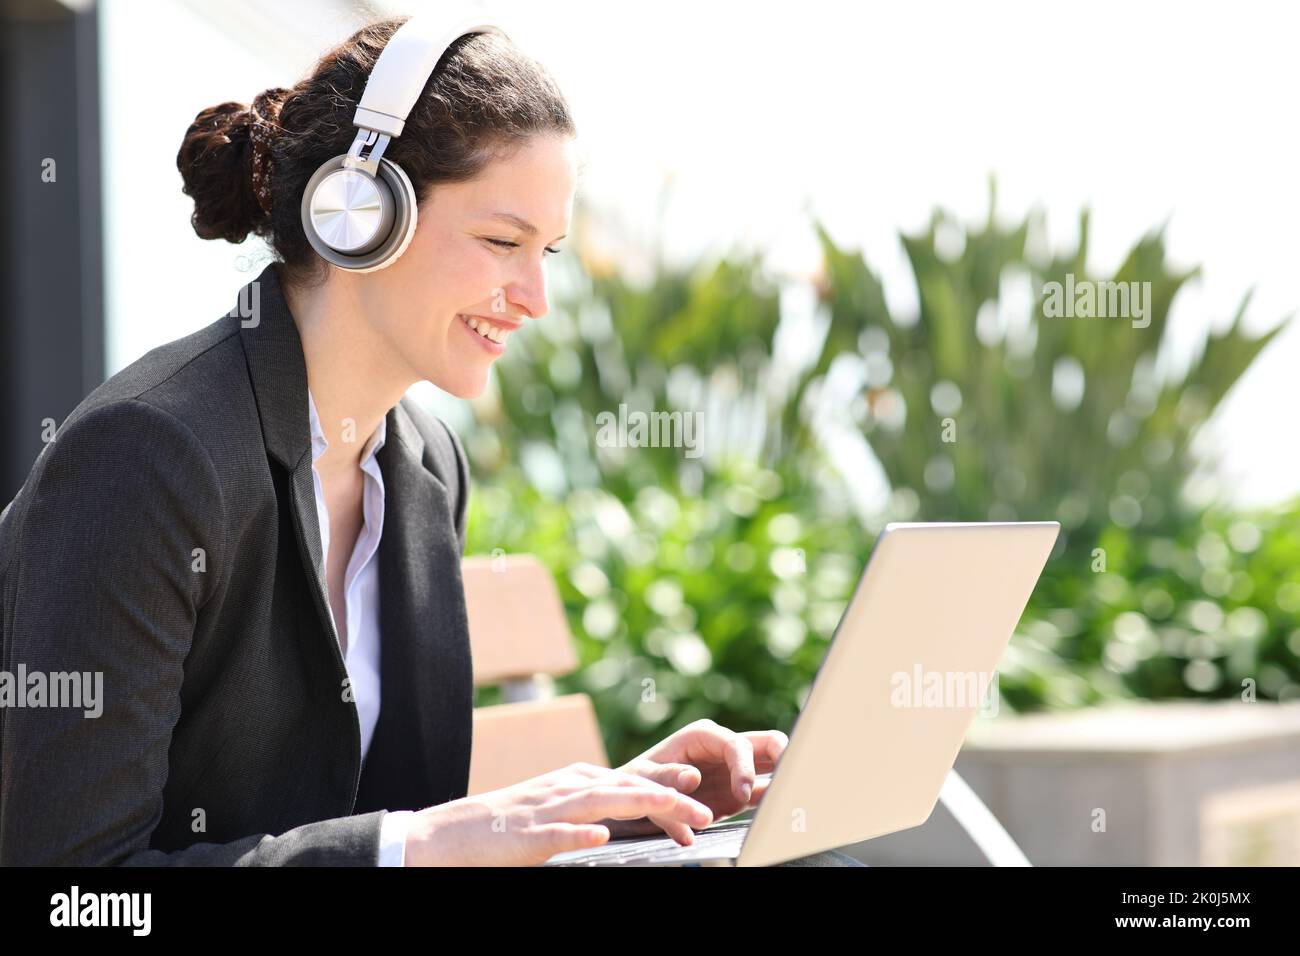 Executive with wireless headphones using laptop in a park Stock Photo